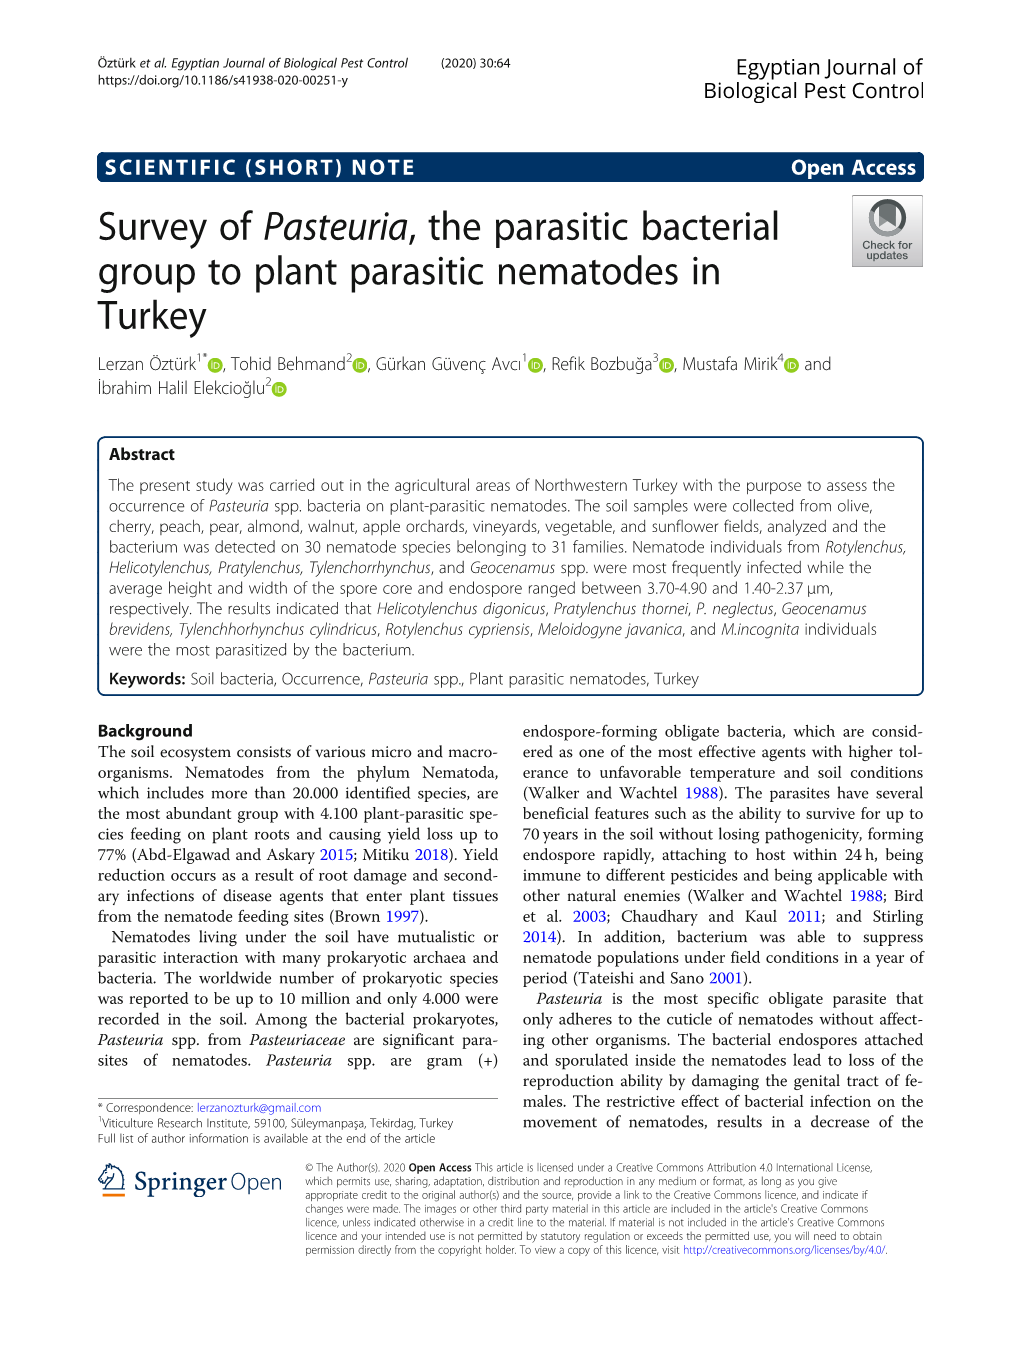 Survey of Pasteuria, the Parasitic Bacterial Group to Plant Parasitic Nematodes in Turkey